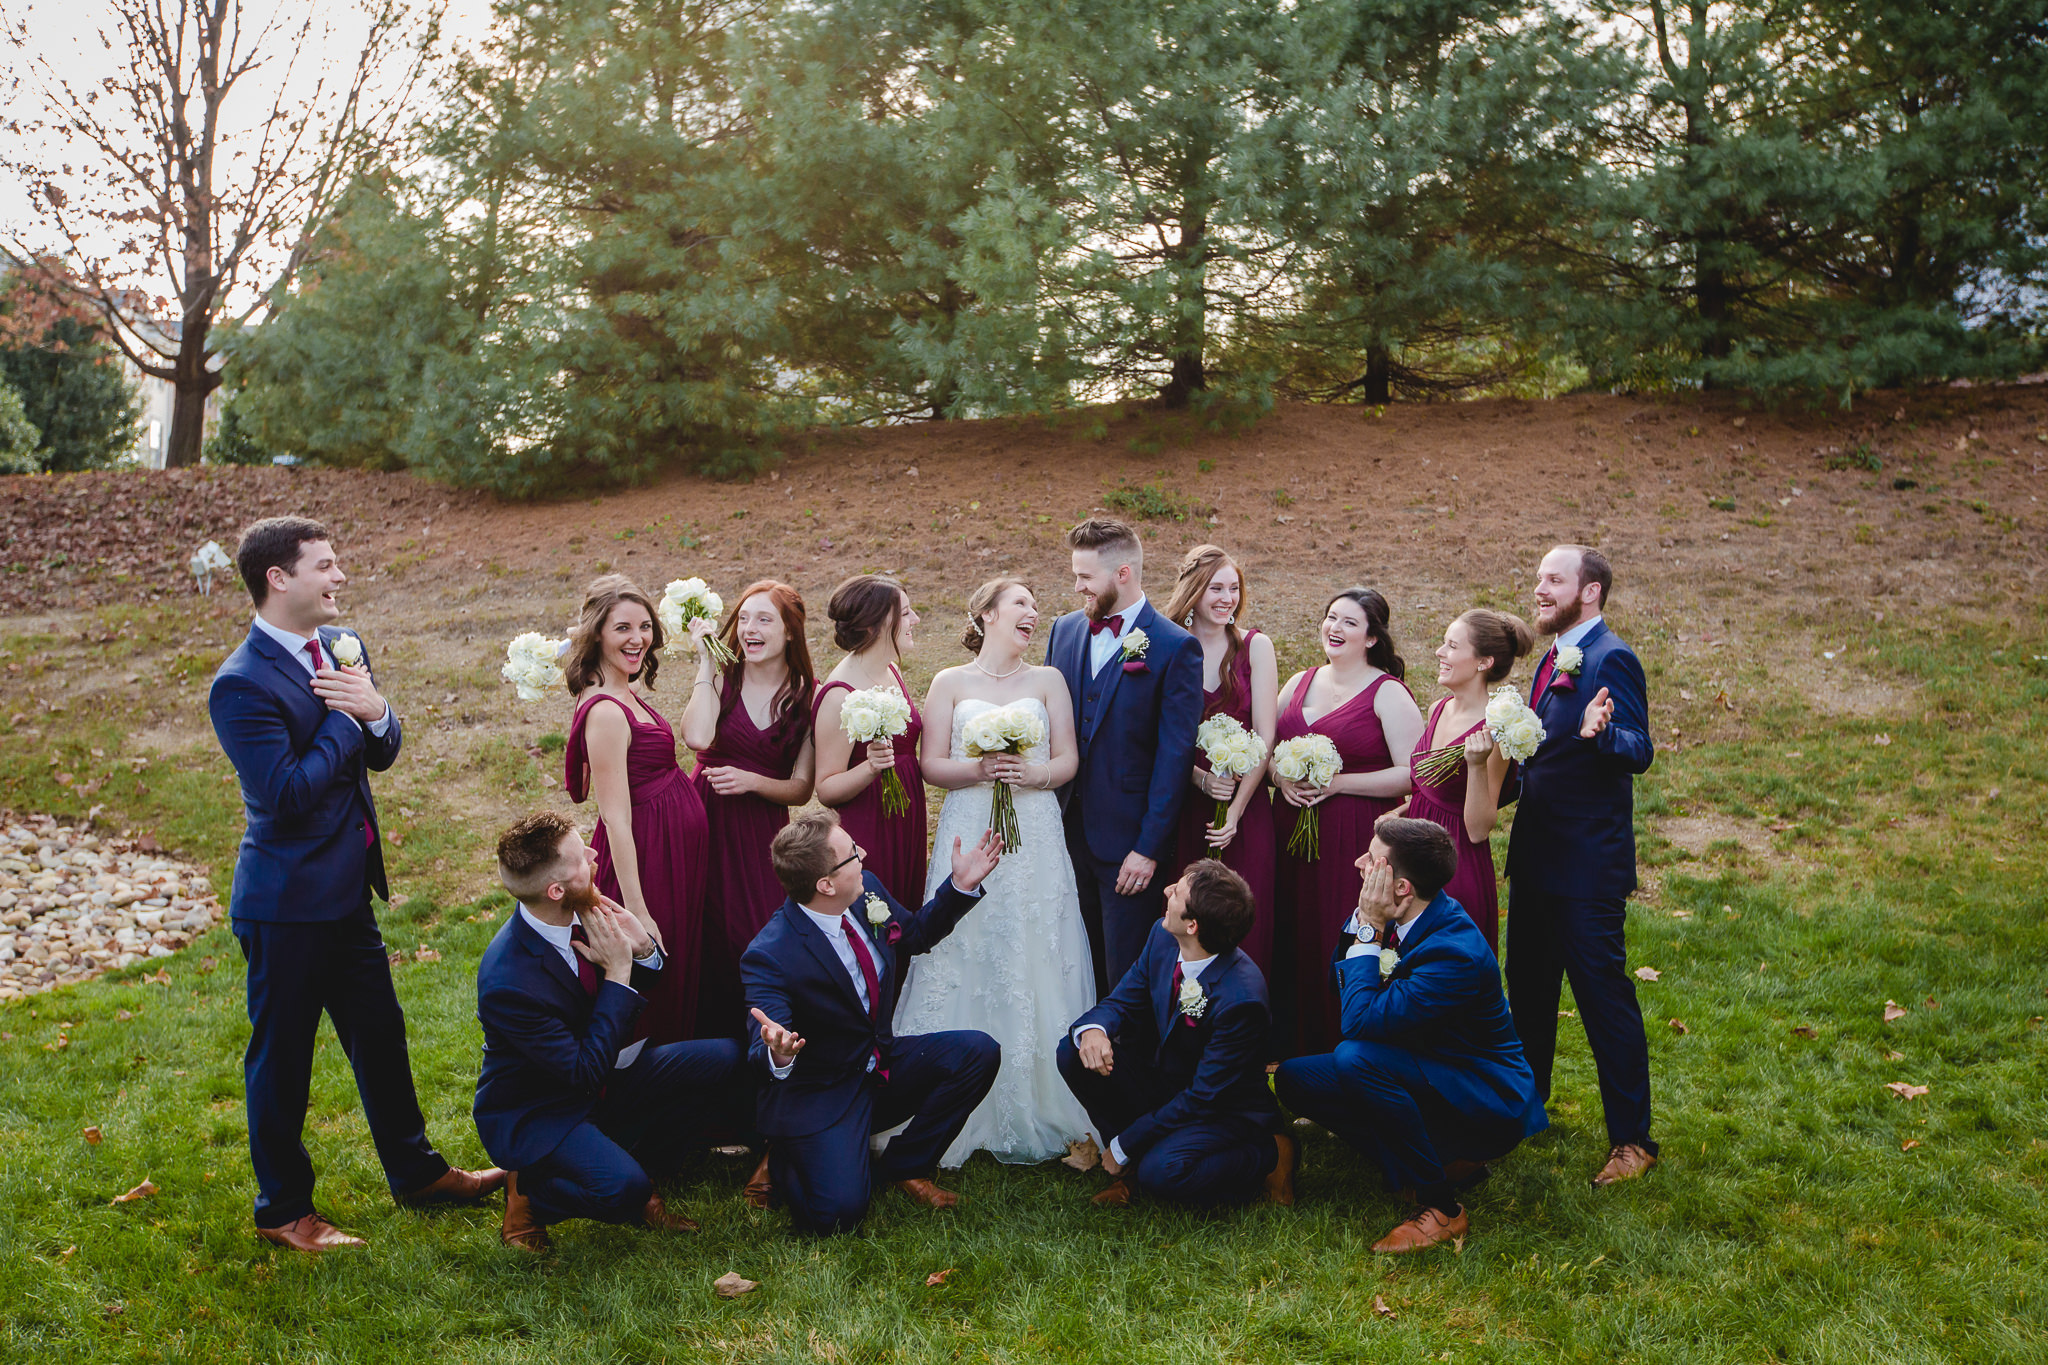 Bridal party poses for a fun photo at the Chadwick